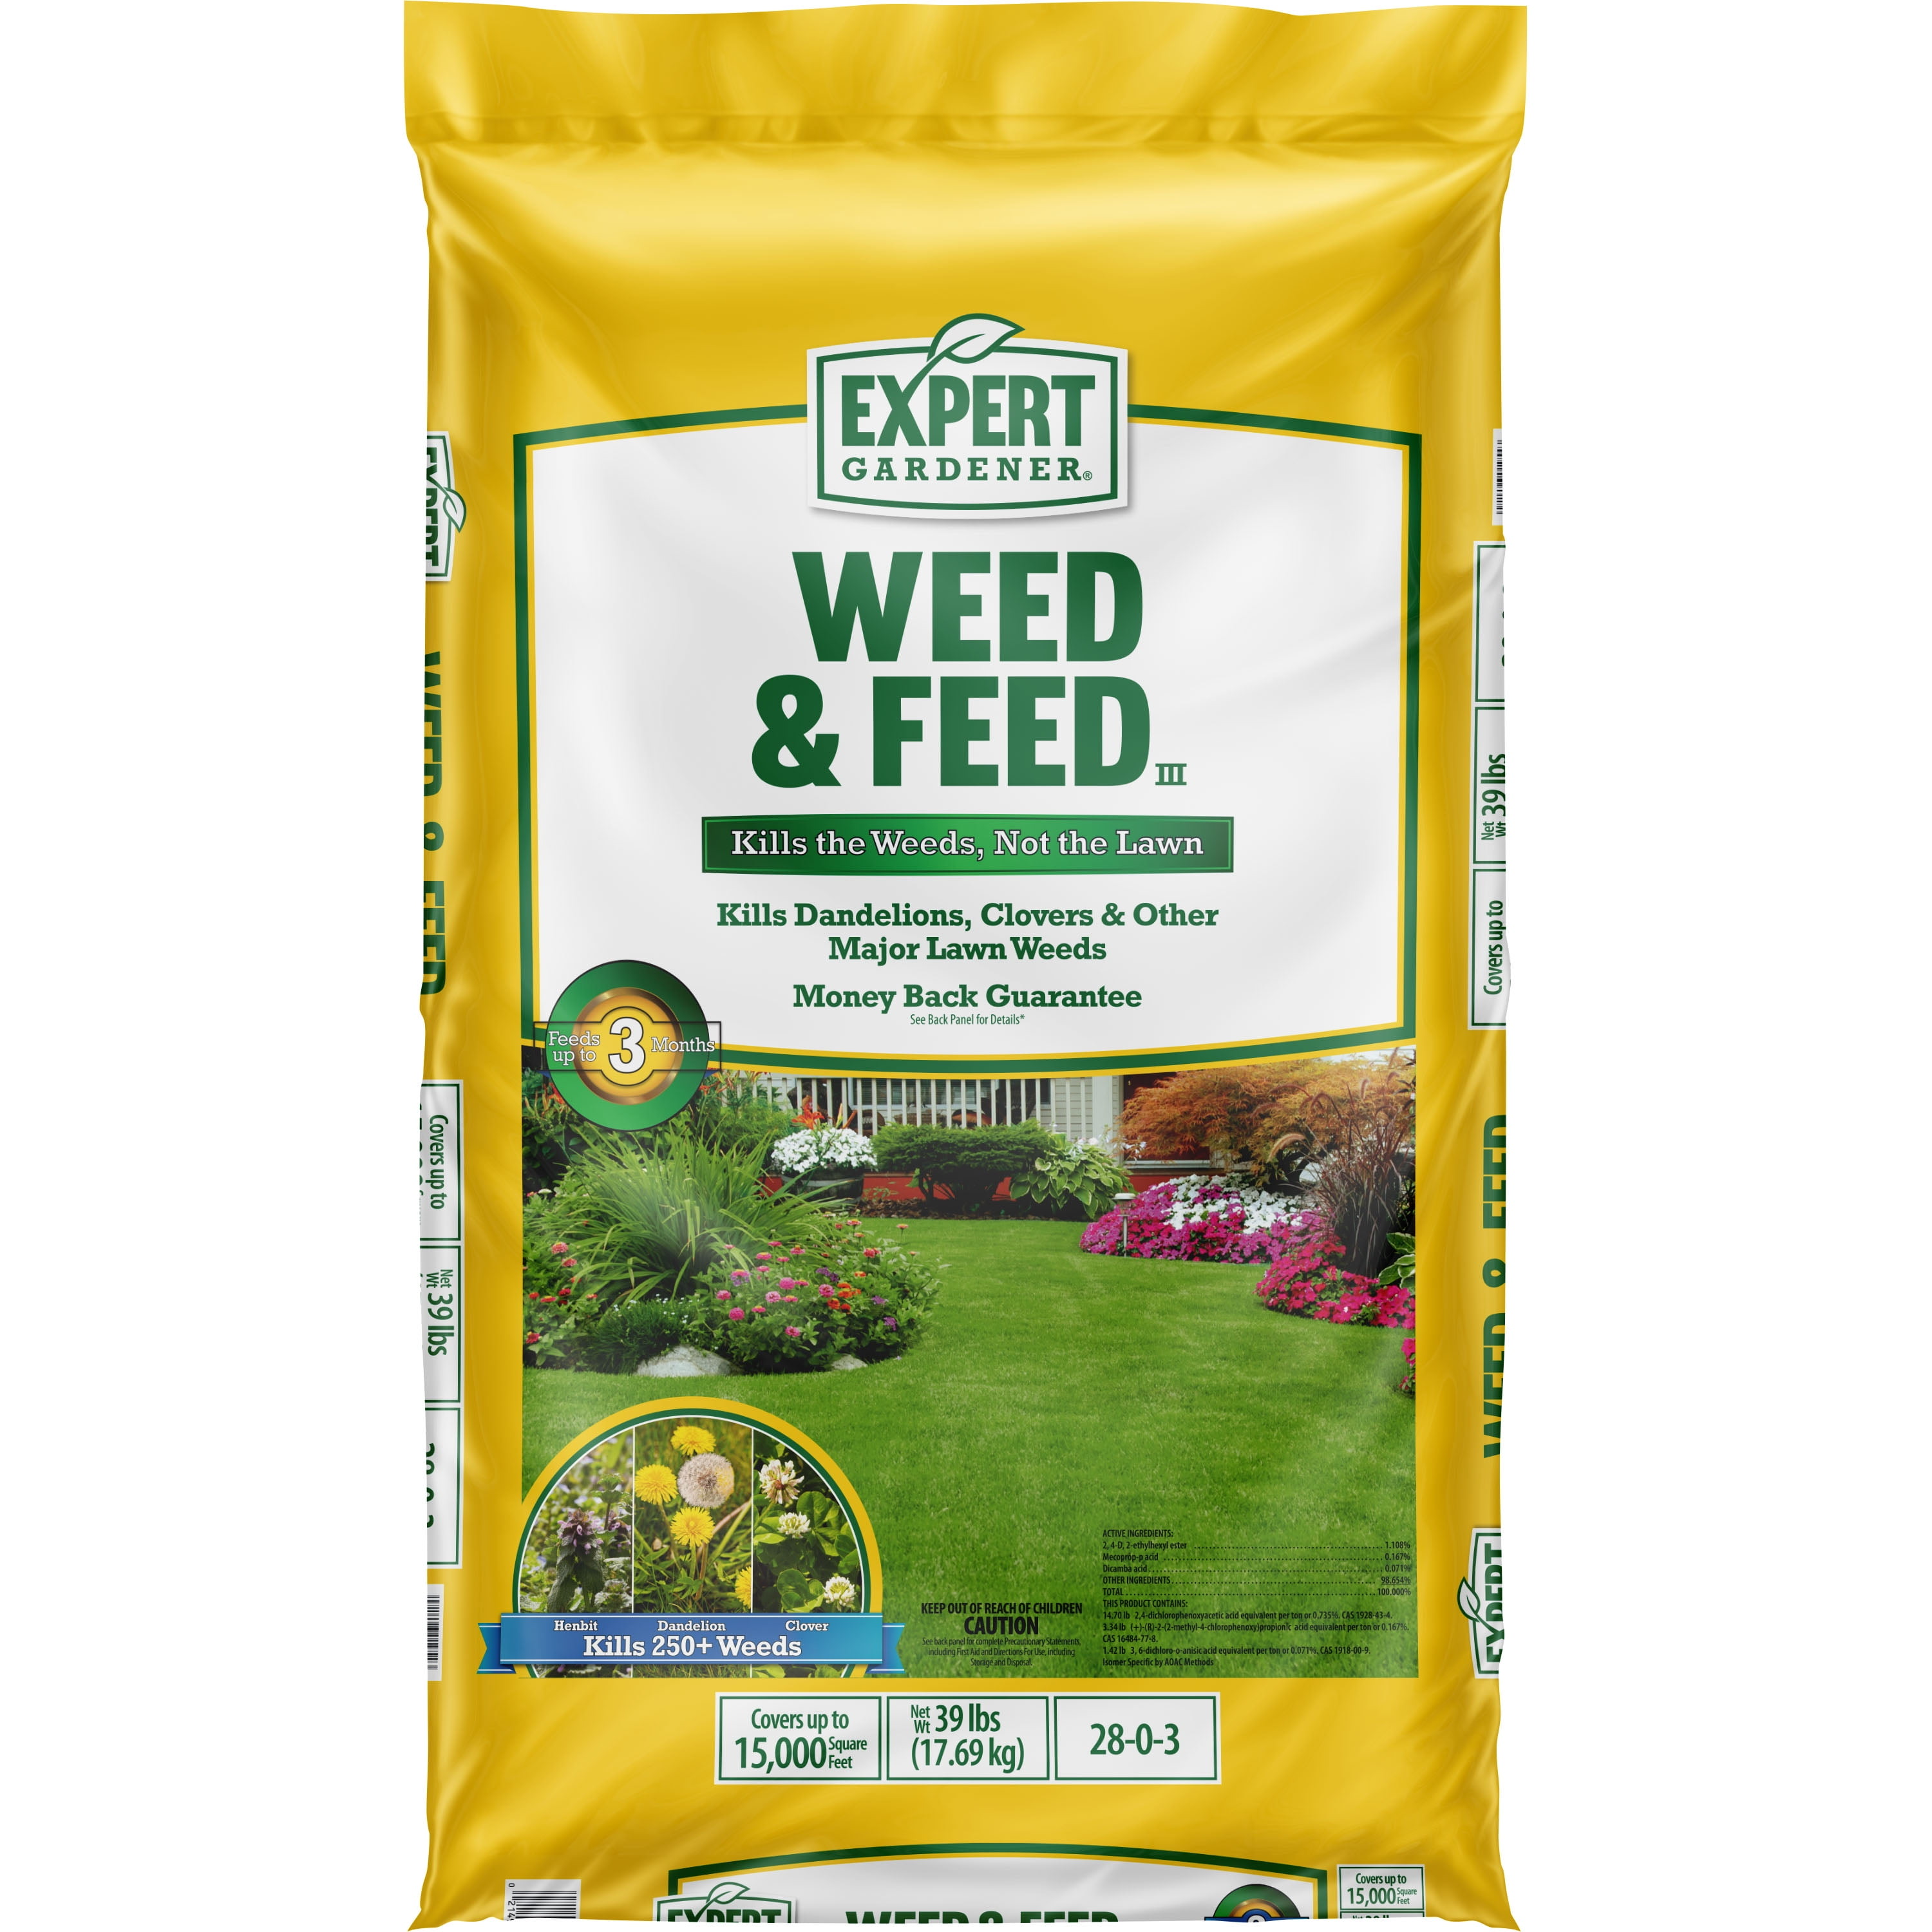 Expert Gardener Weed & Feed, 28-0-3 Lawn Fertilizer and Weed Control , 31.2 lbs - 12,000 Sq. ft. - Walmart.com